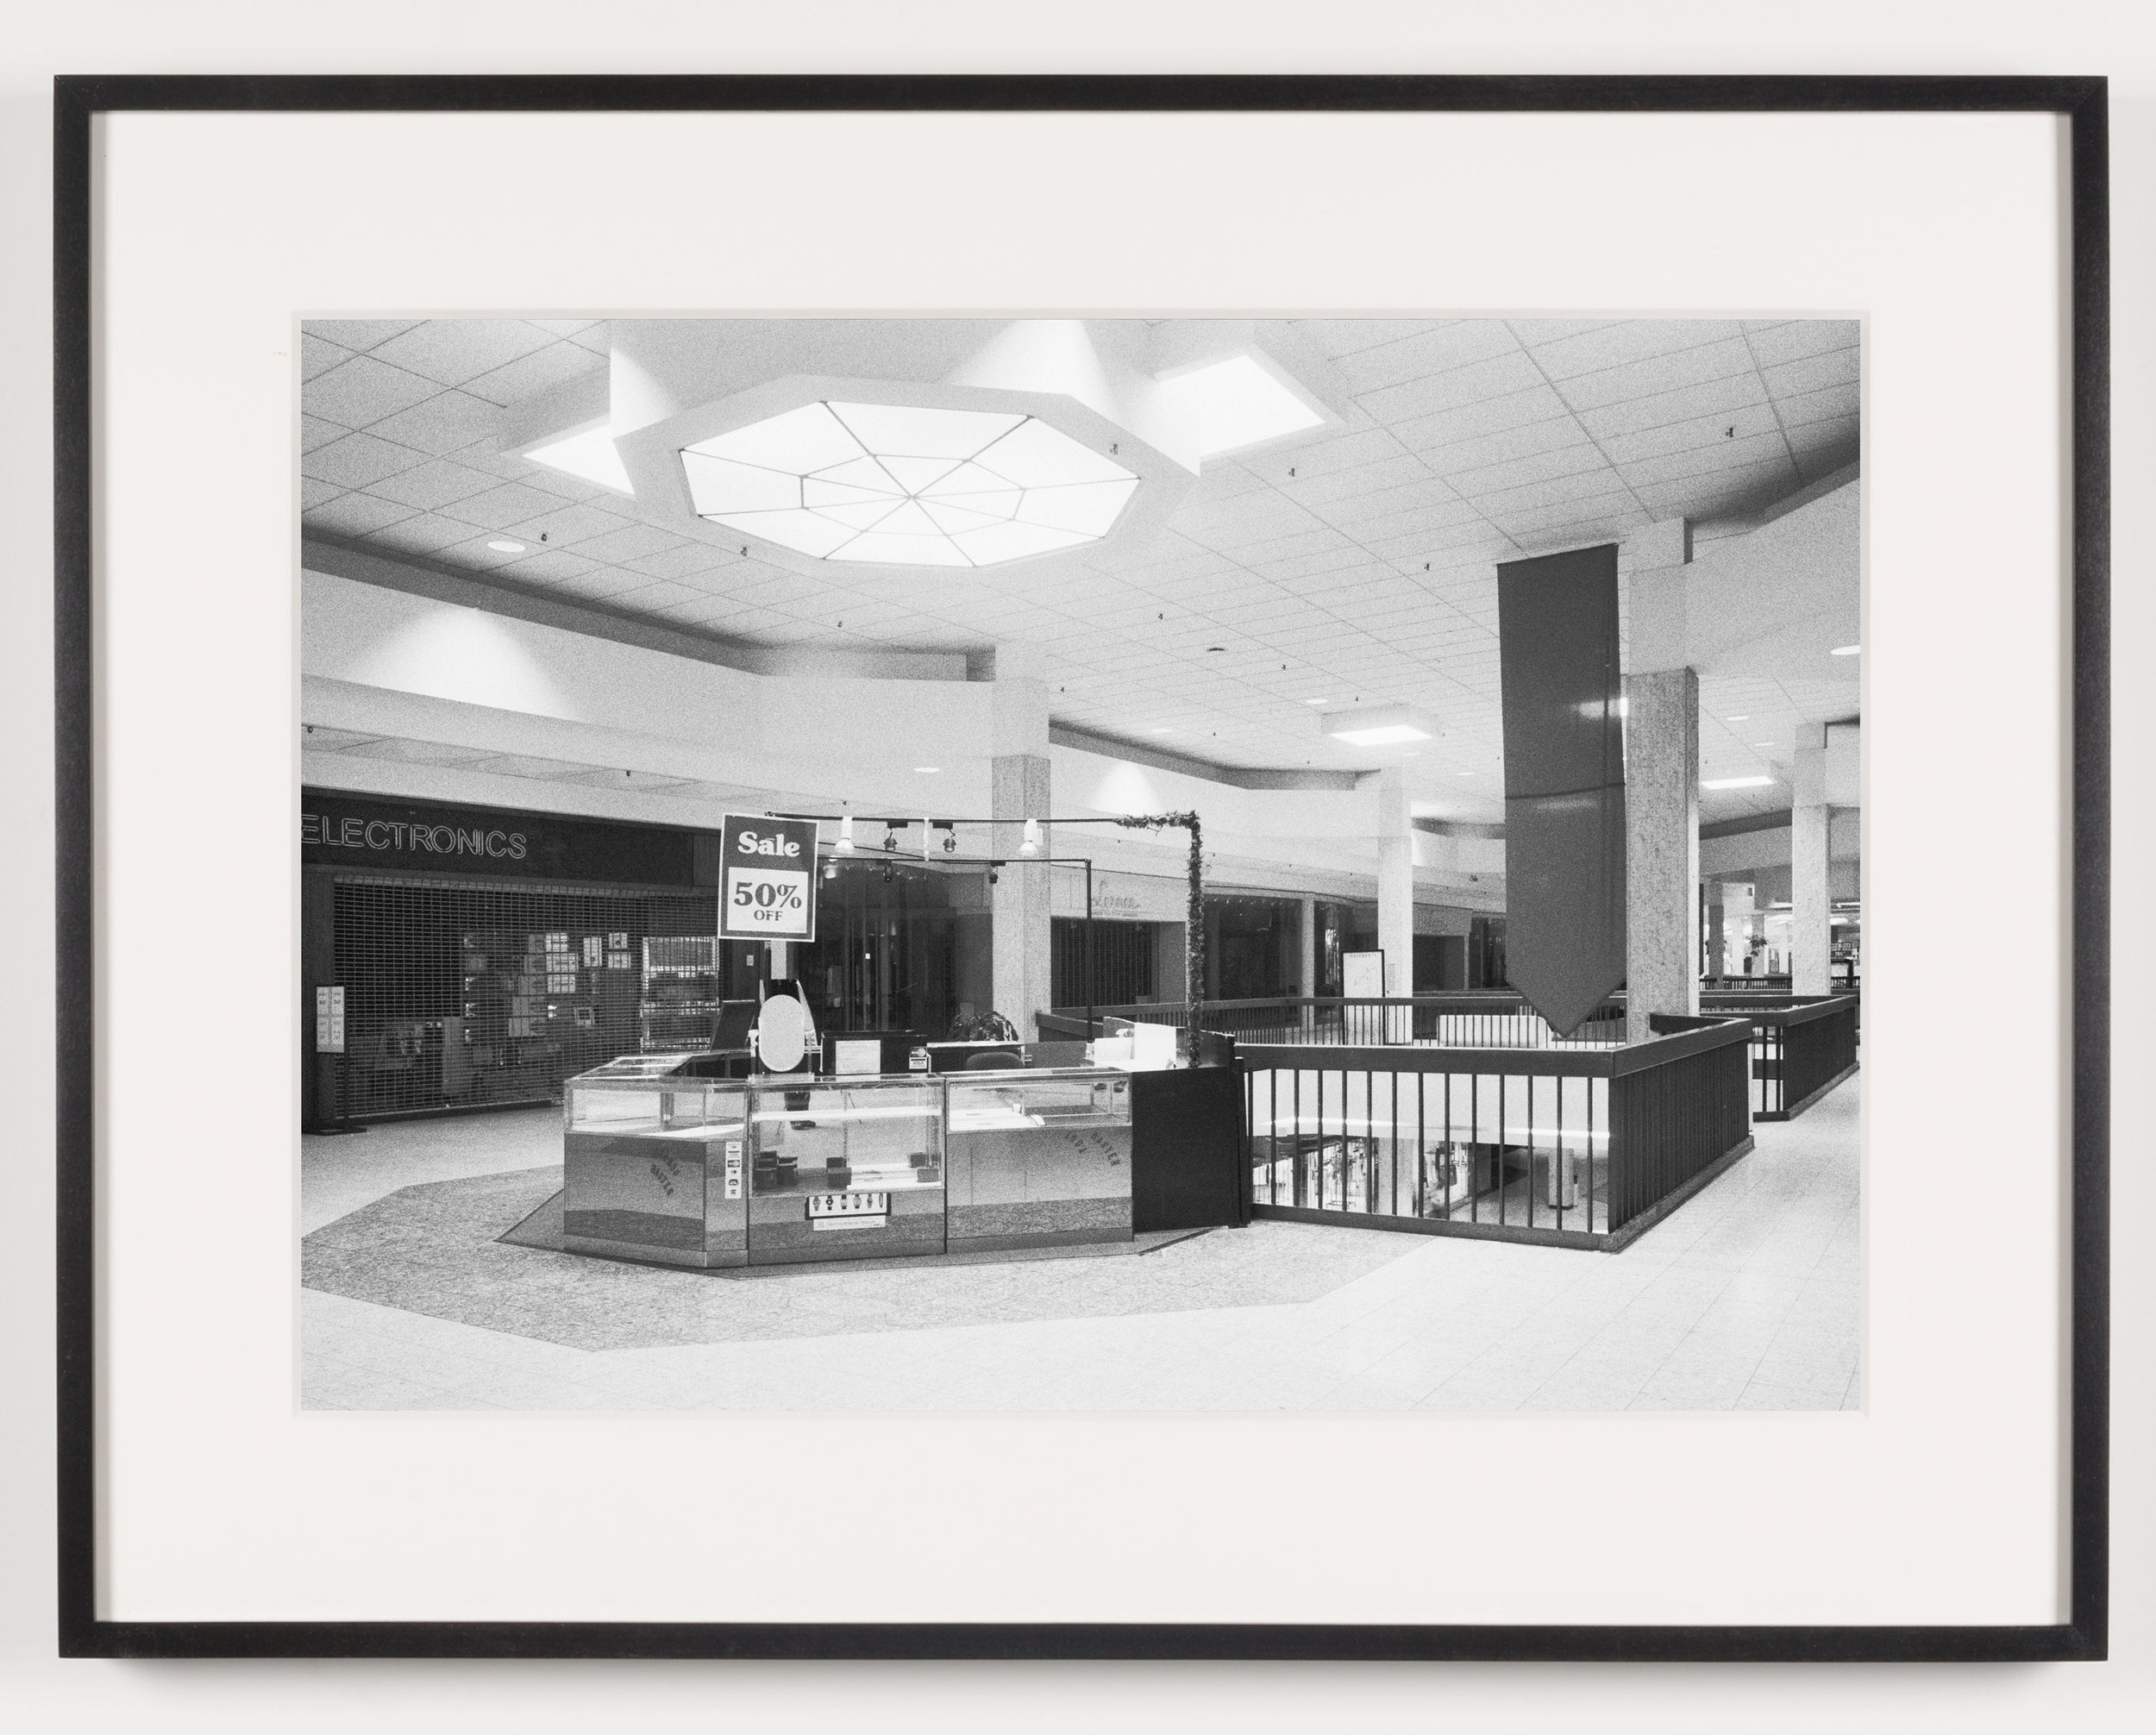   Randall Park Mall ('Electronics') North Randall, OH, Est. 1976, Demo. 2014   2011  Epson Ultrachrome K3 archival ink jet print on Hahnemühle Photo Rag paper  21 5/8 x 28 1/8 inches   American Passages, 2001–2011    A Diagram of Forces, 2011     